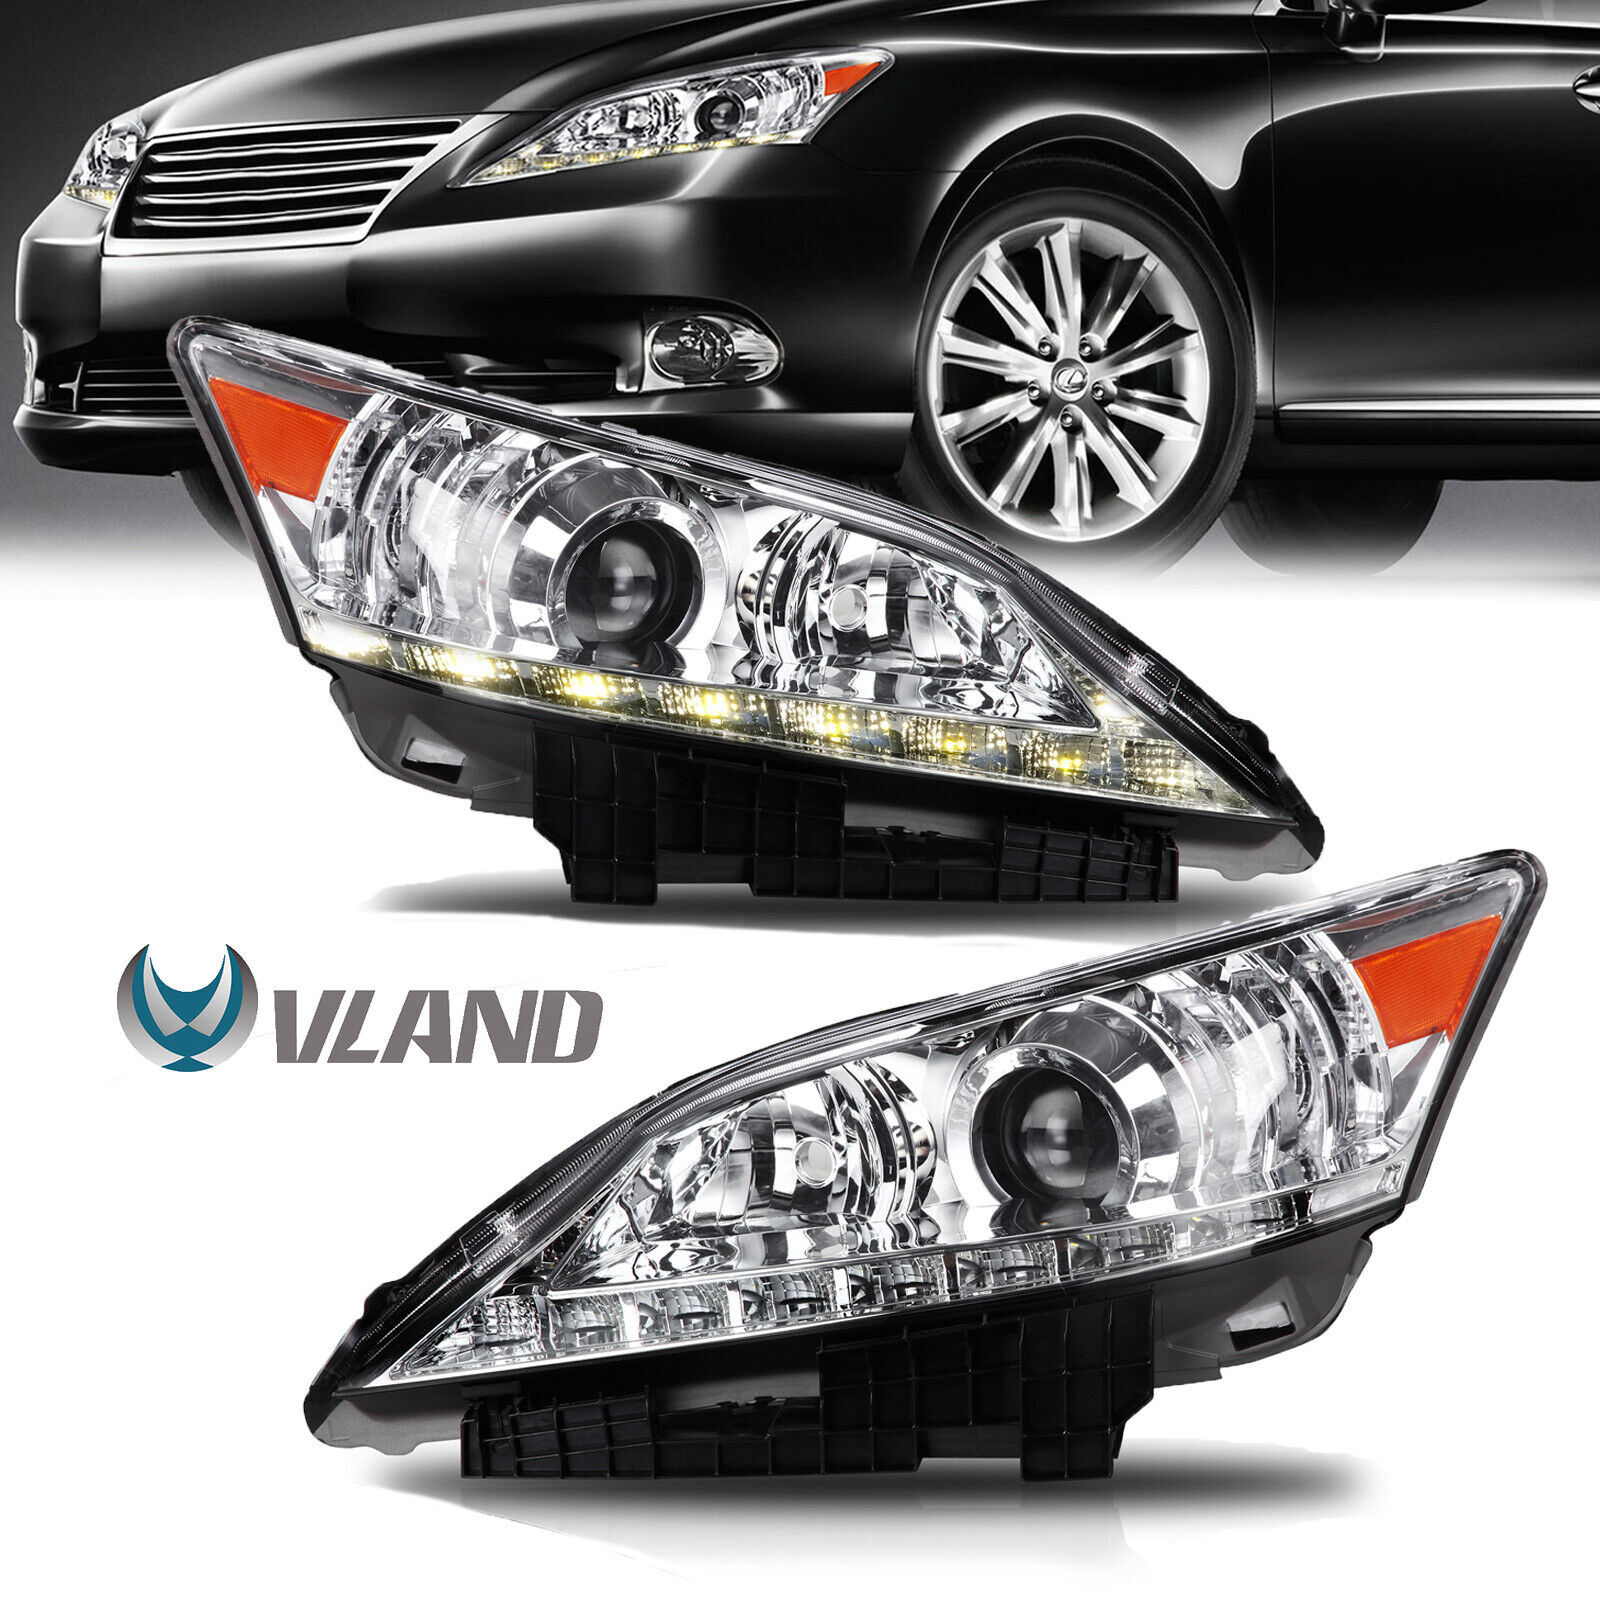 VLAND Headlights For 2010 2011 2012 Lexus ES350 Xenon AFS Front Lamps Left+Right